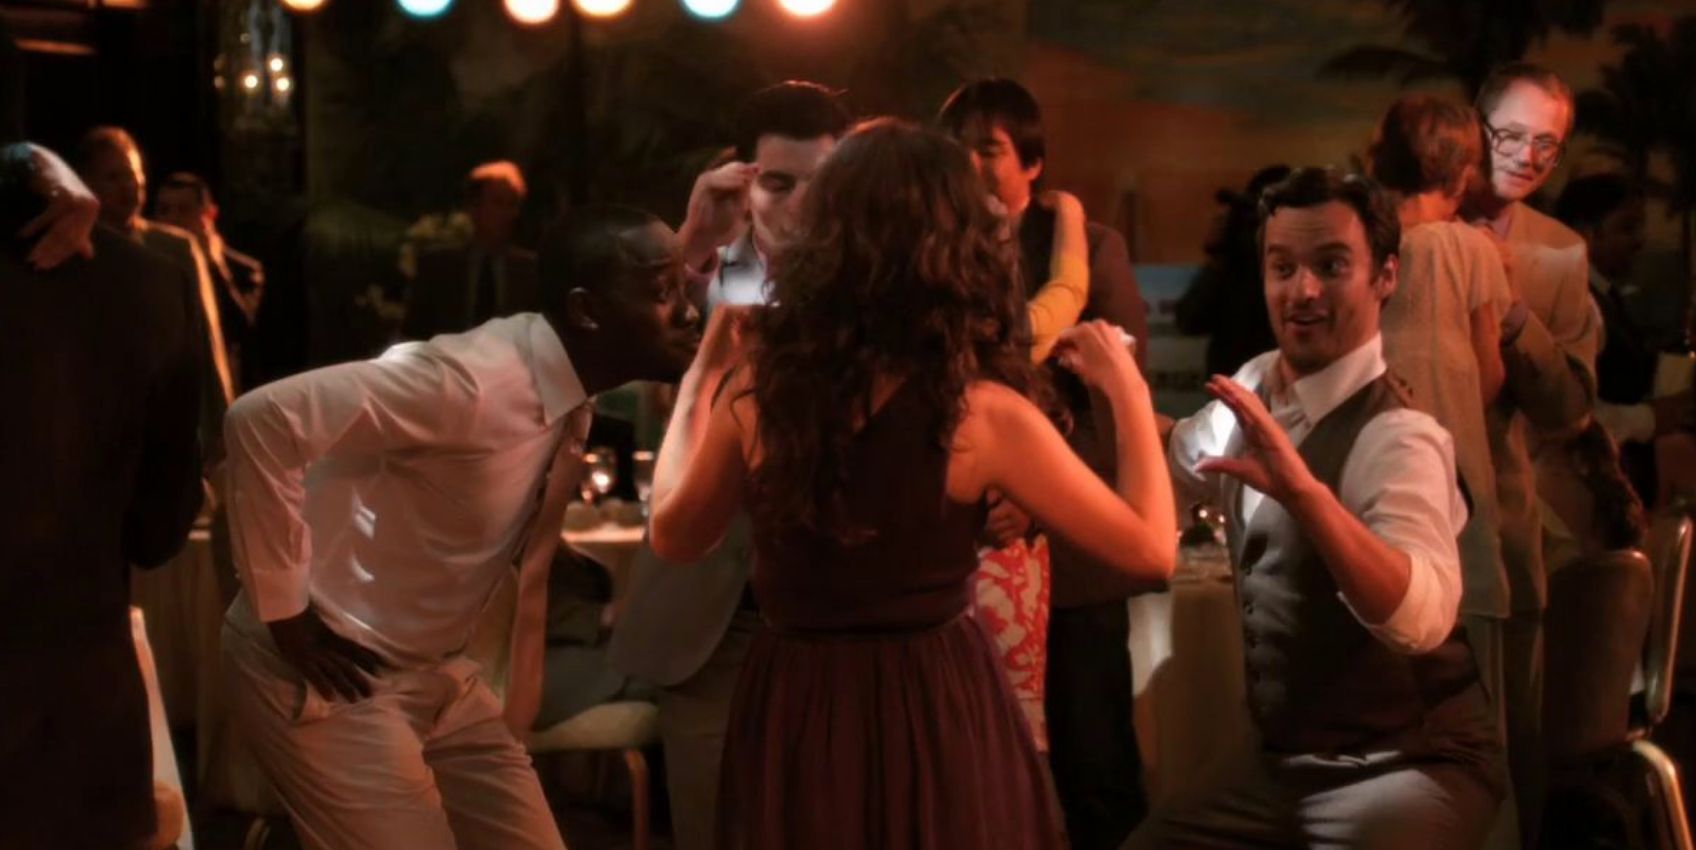 The roommates dance together at the first wedding they attend in New Girl